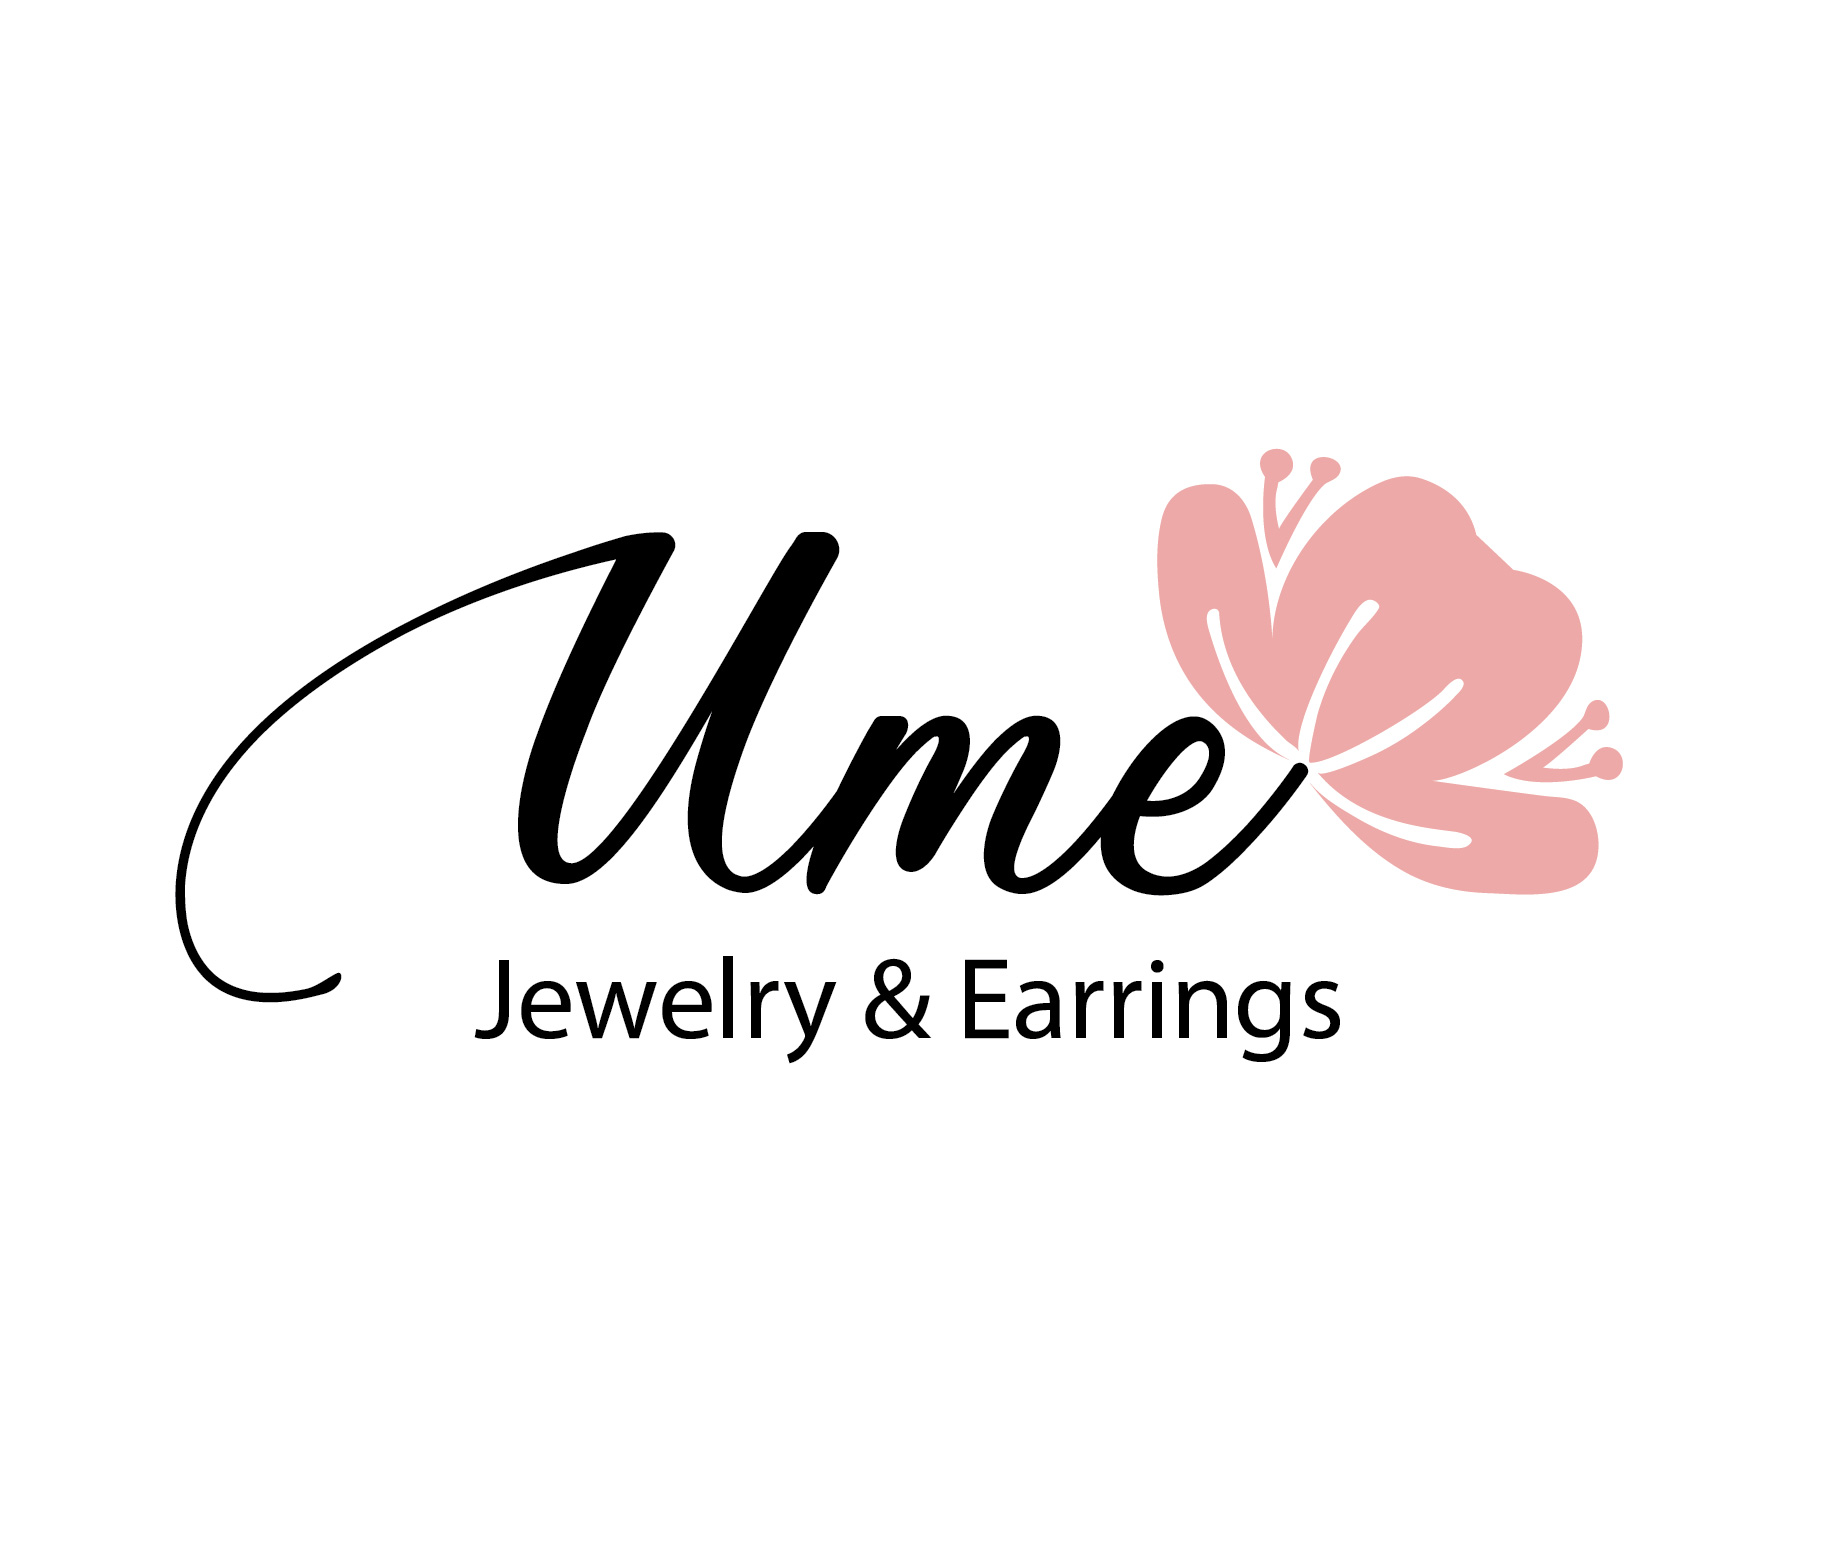 Ume is the logo created for an online shop, selling handmade jewelry and earrings.